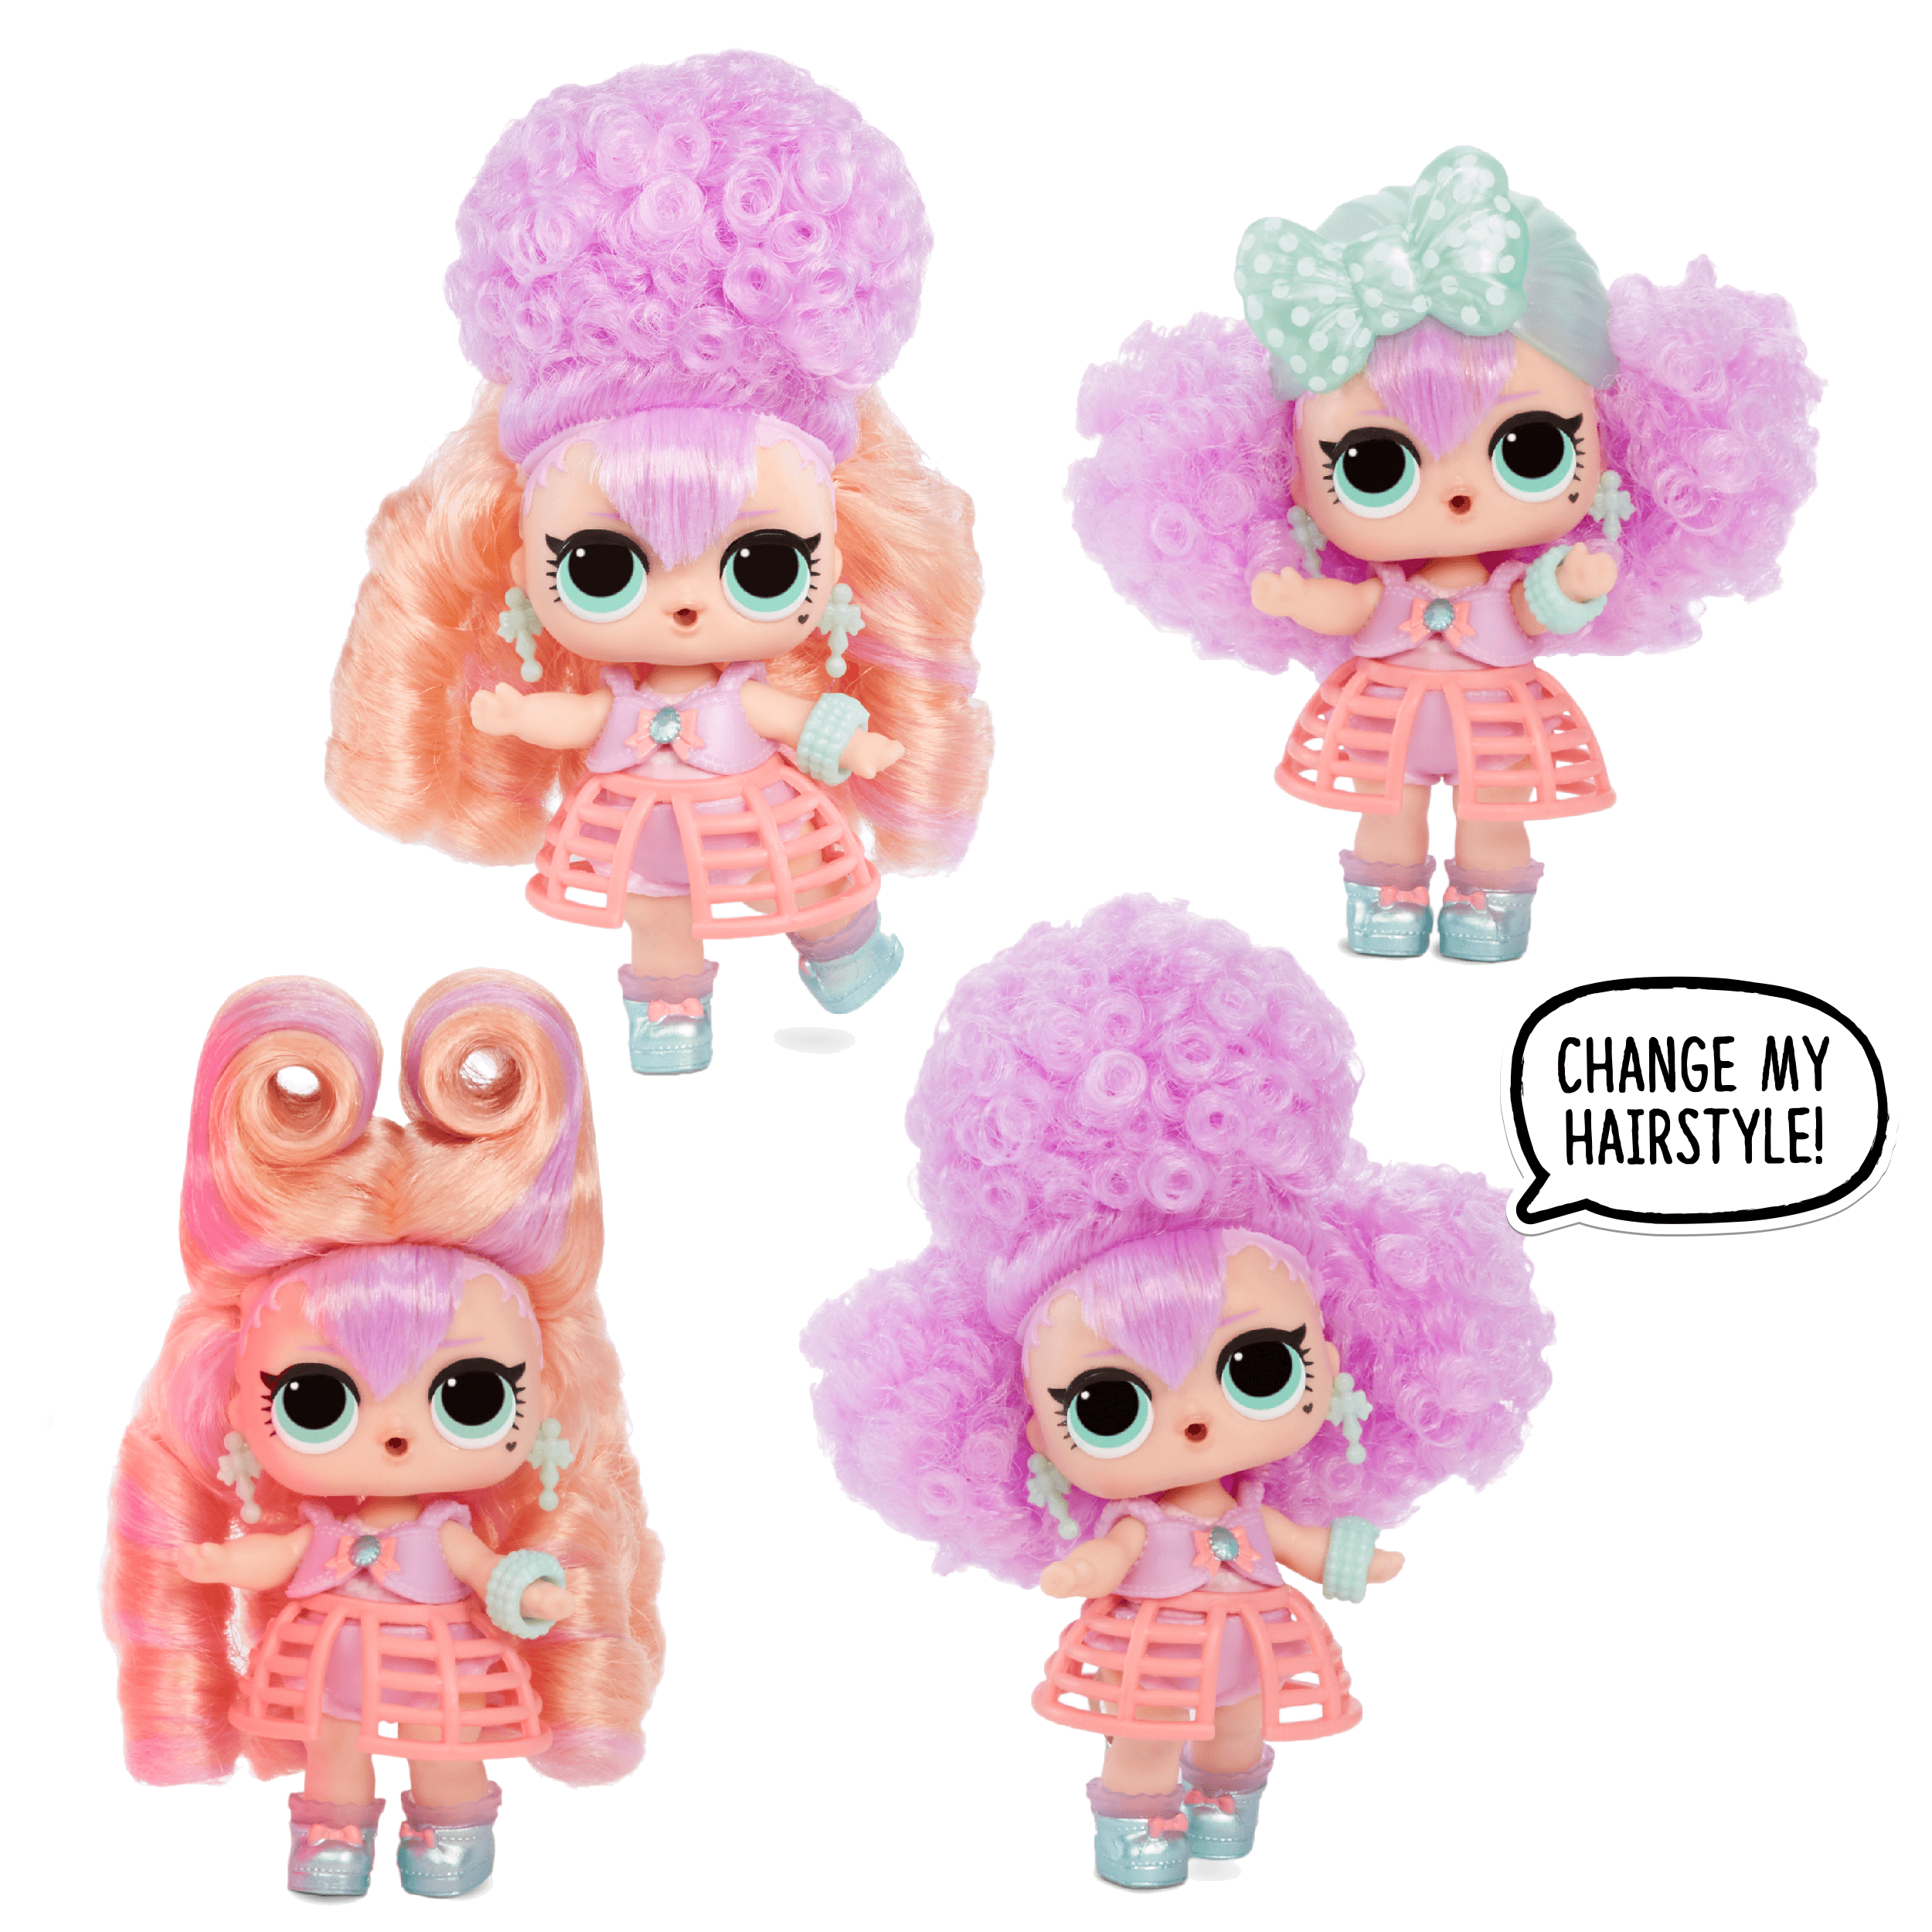 LOL Surprise Hairvibes Dolls With 15 Surprises Including Exclusive Doll, Fashion Outfits, Shoes, Accessories, Wigs, And More - For Kids Ages 6-8 - image 5 of 8